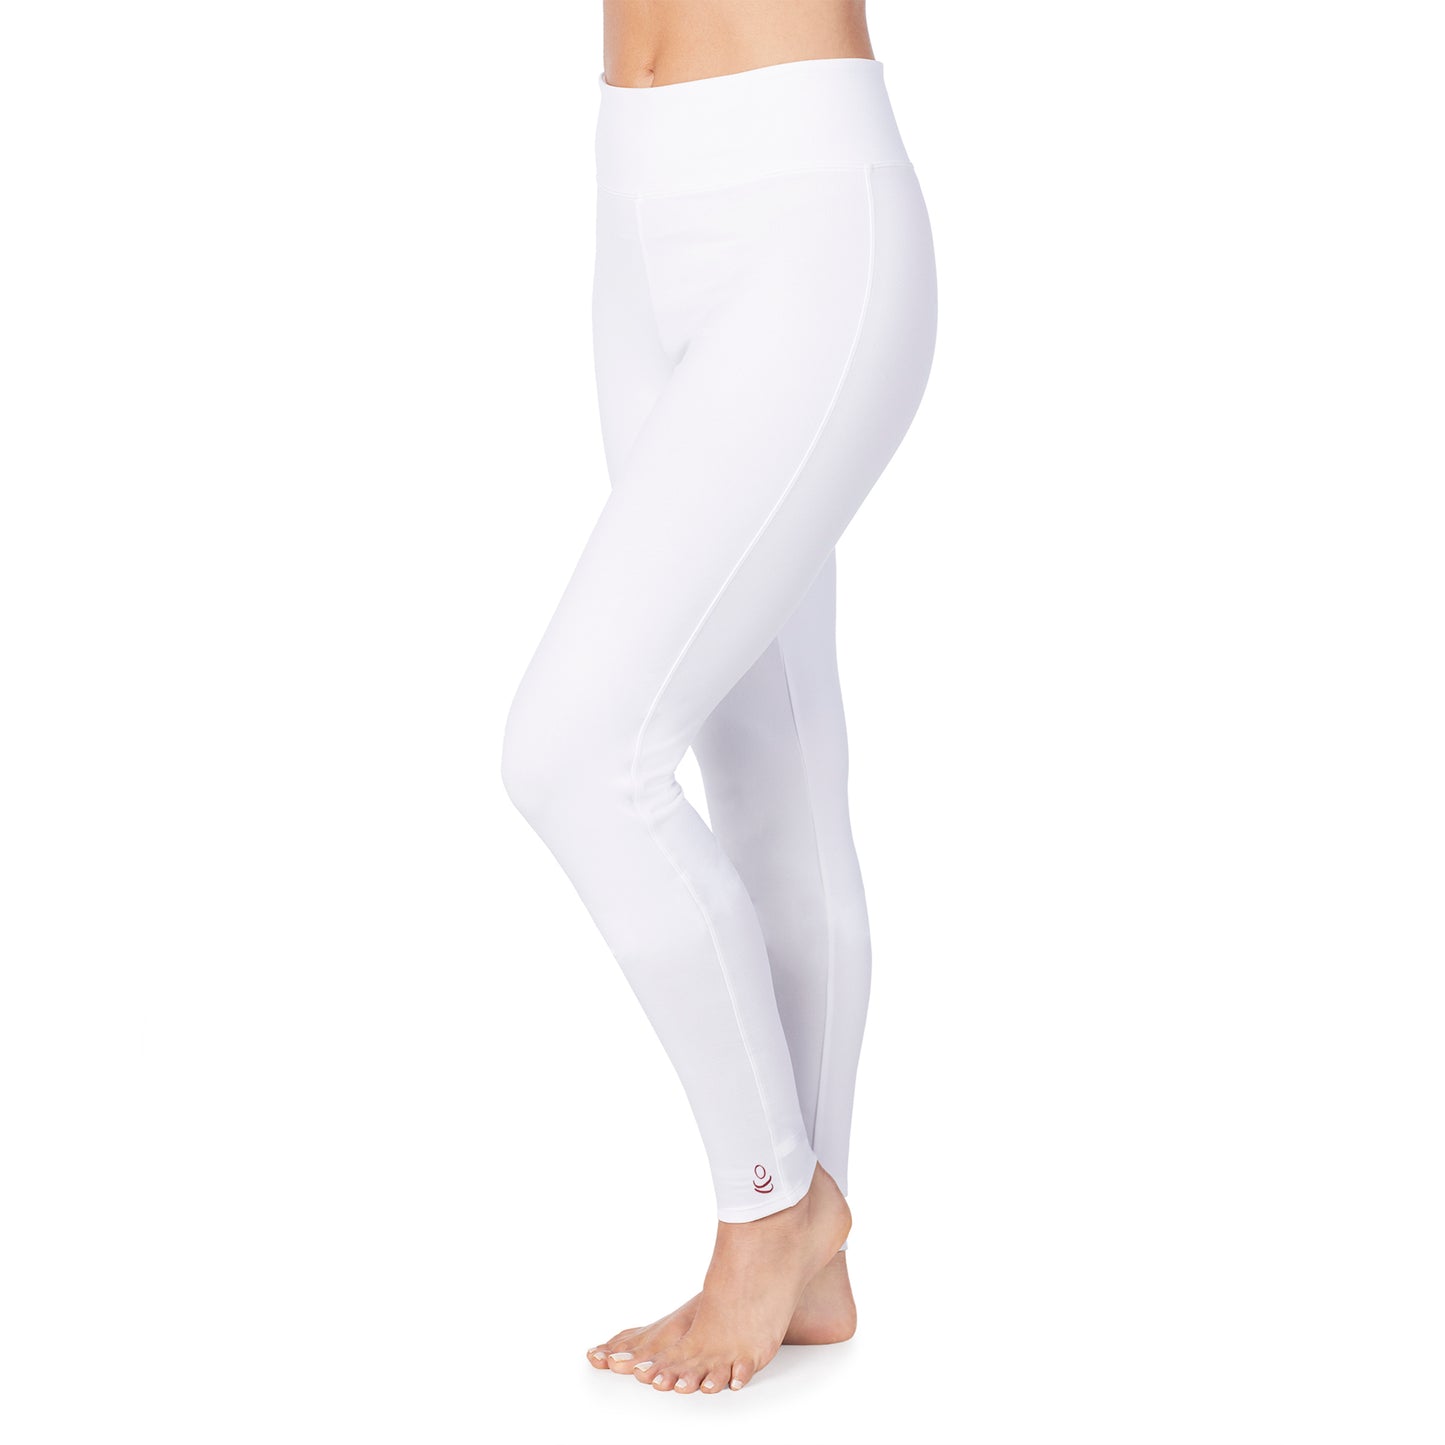 White; Model is wearing size S. She is 5’9”, Bust 32”, Waist 25.5”, Hips 36”.@lower body of A lady wearing white legging